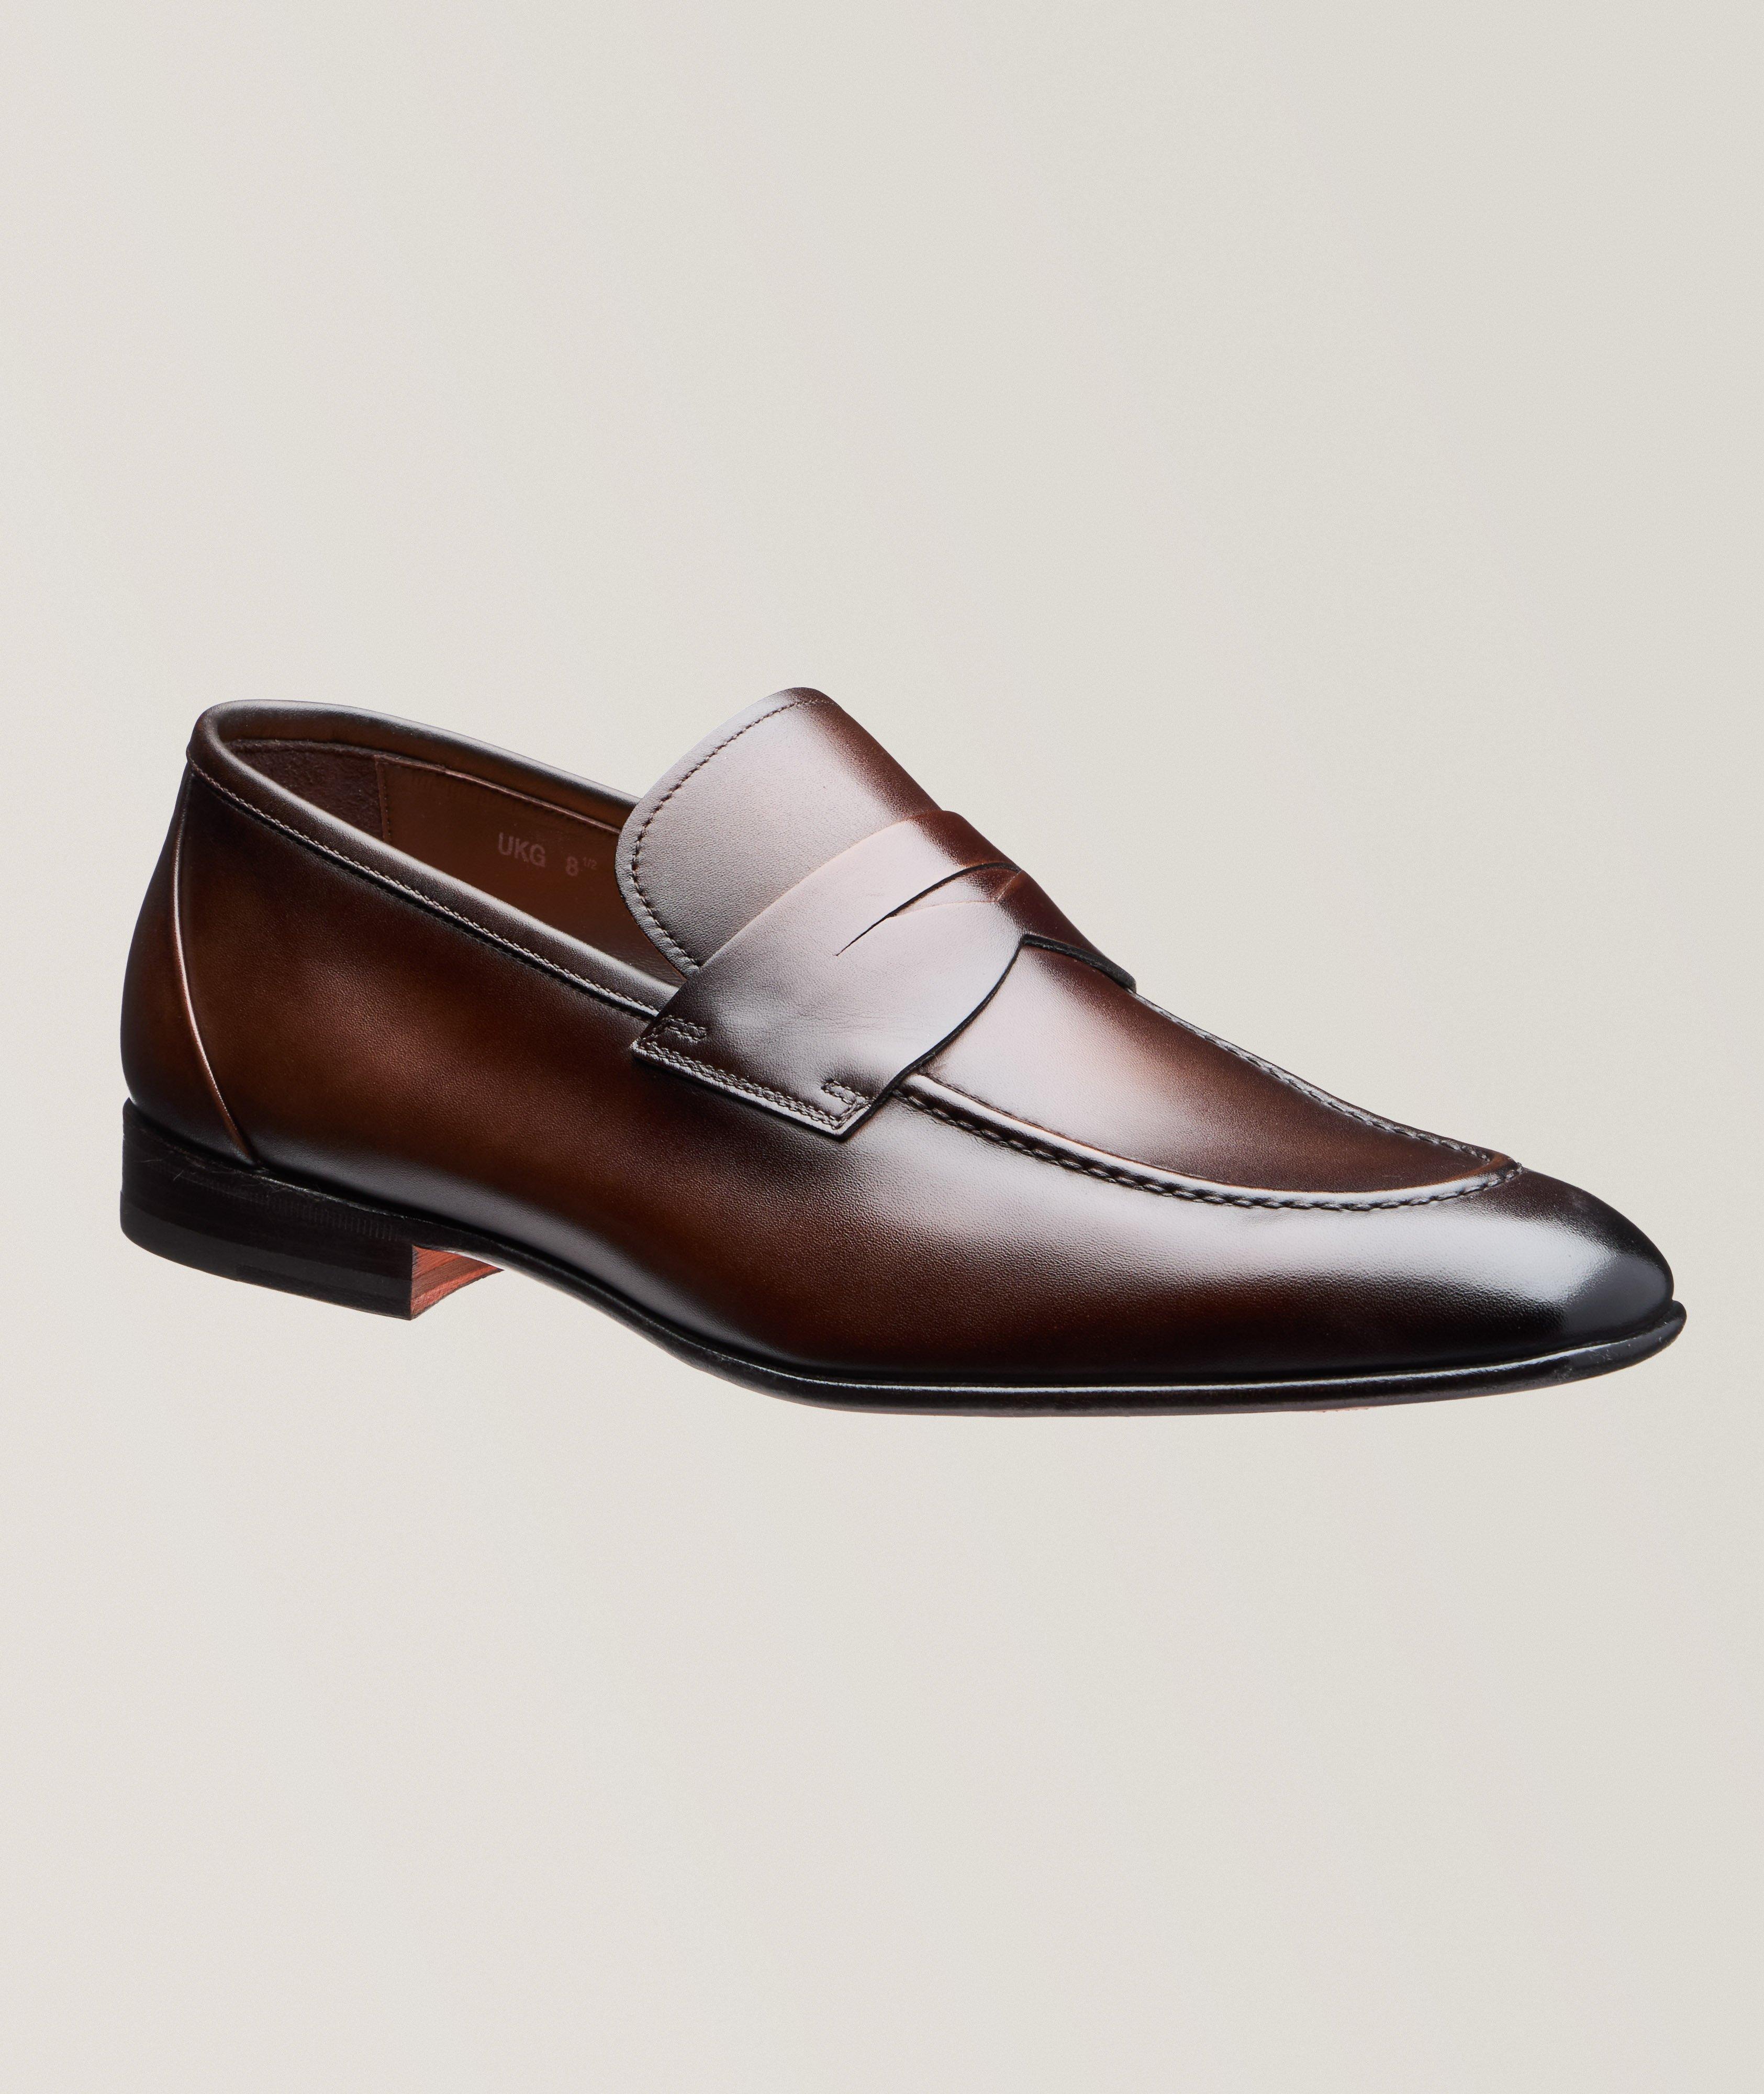 Gannon Leather Loafers image 0